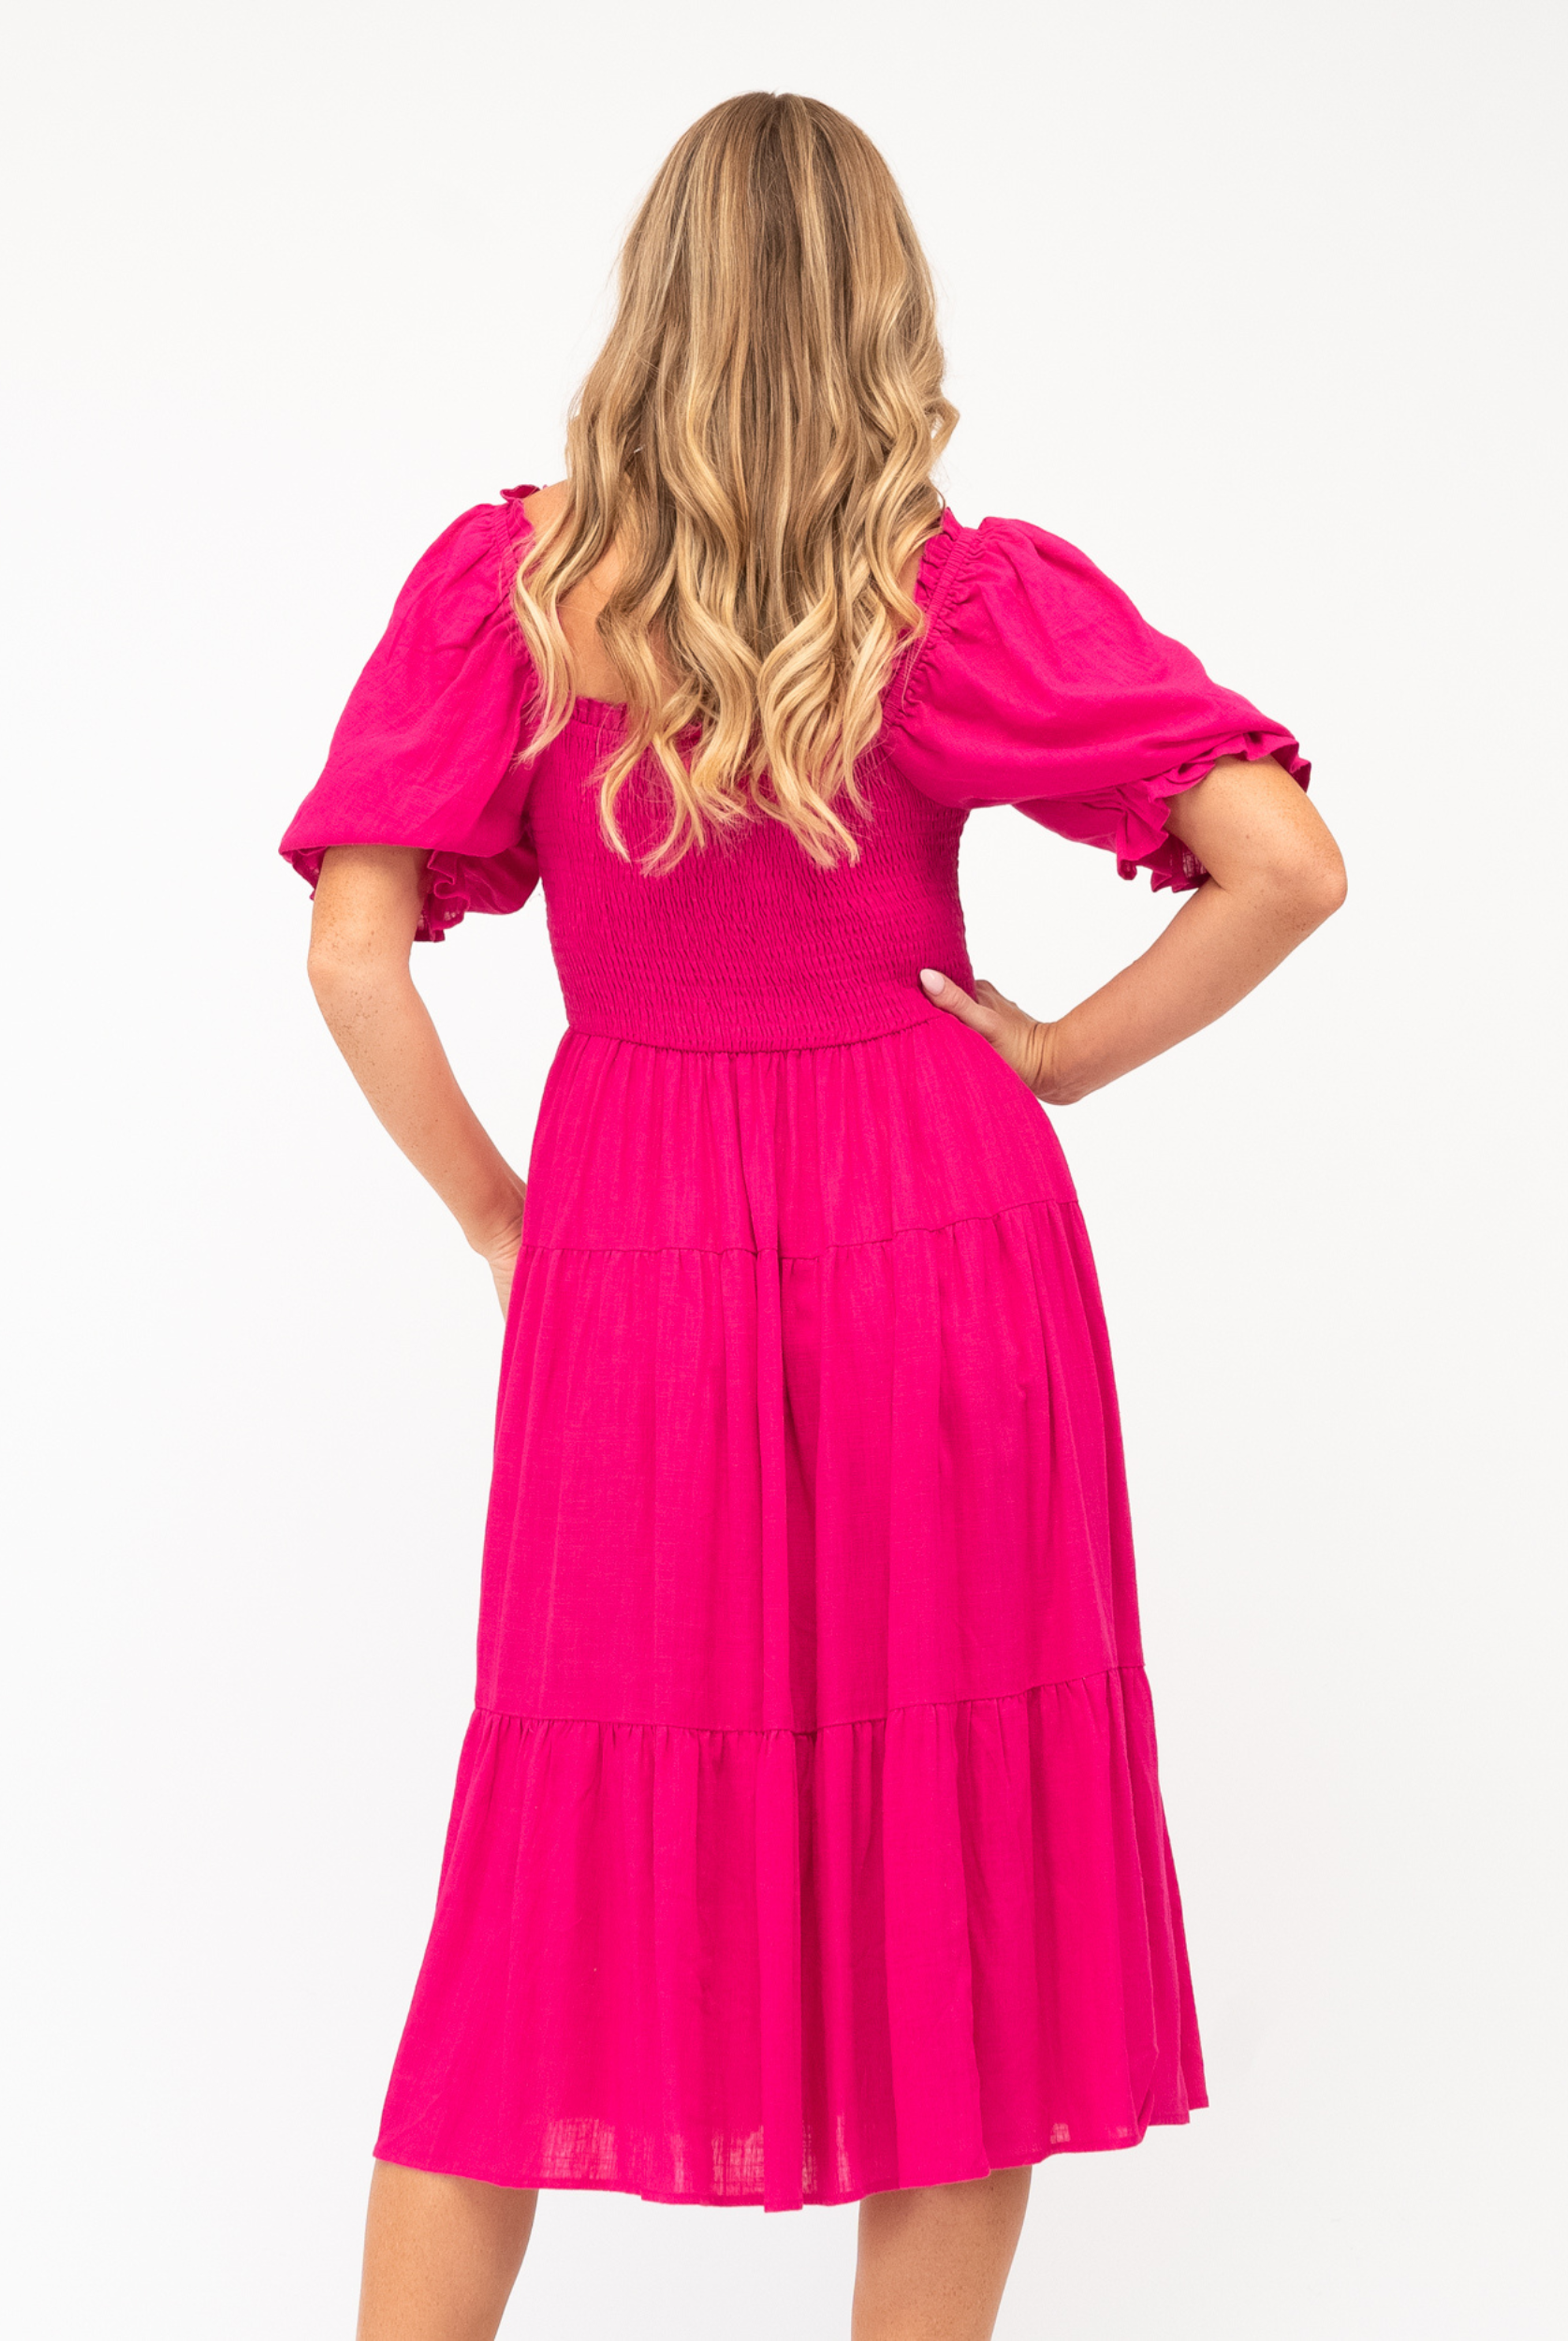 Model wearing the pink Bobbie Dress from Label of Love